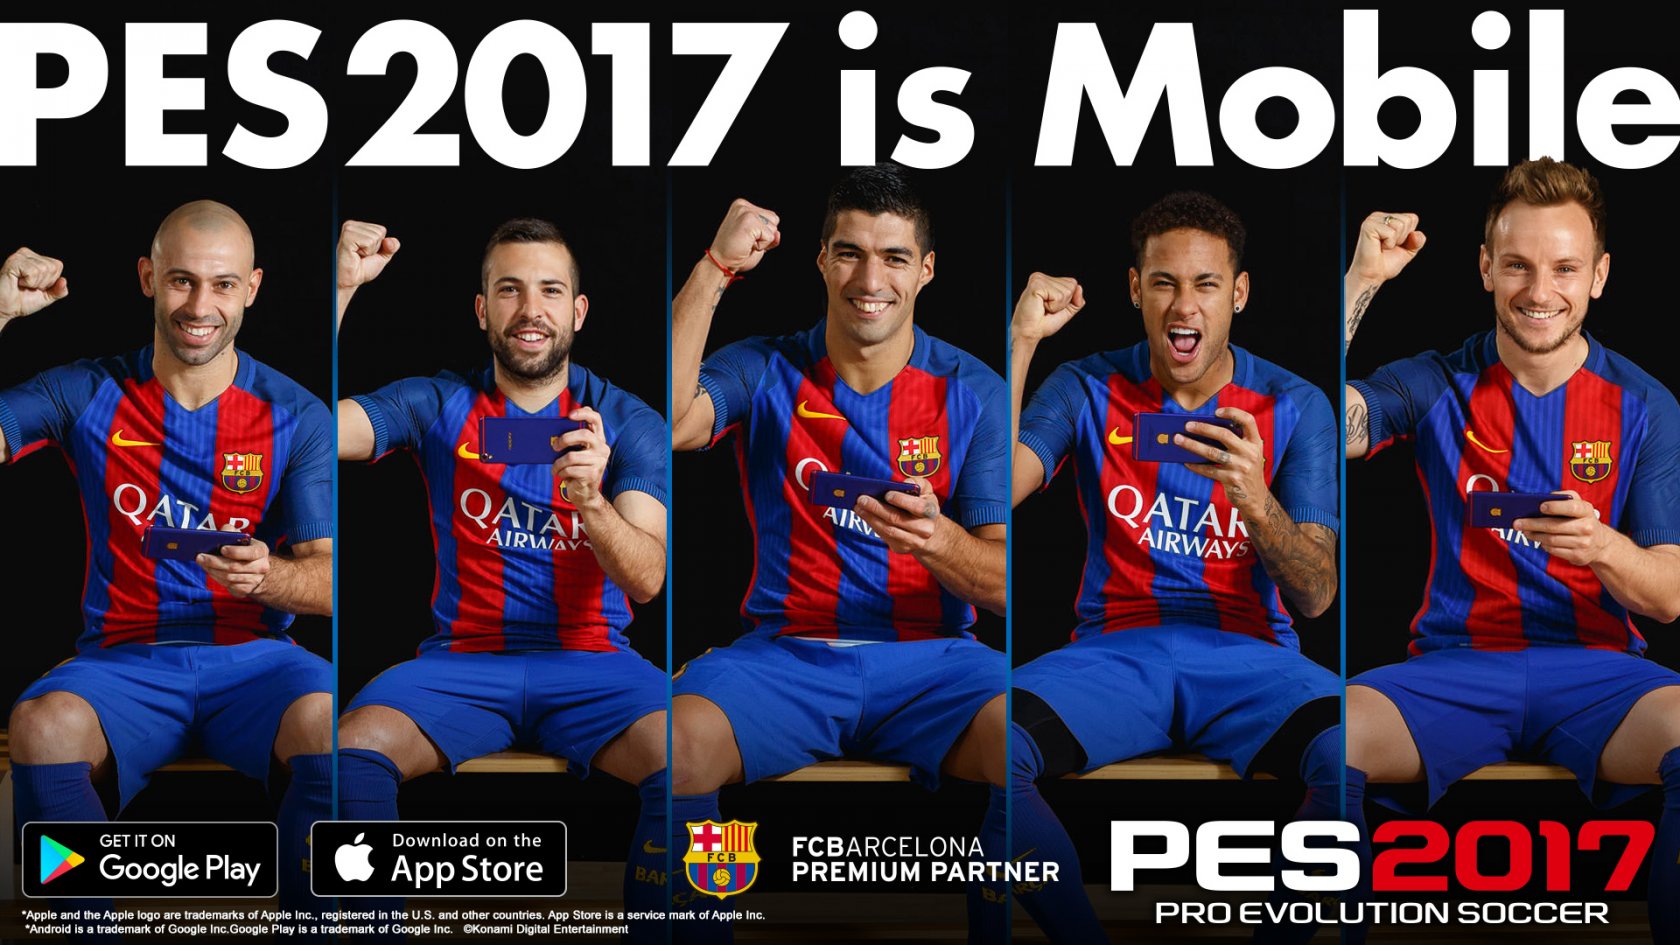 http://www.gamelegends.it/wp-content/uploads/2017/05/PES2017_FCB-Players-GamePlay.jpg